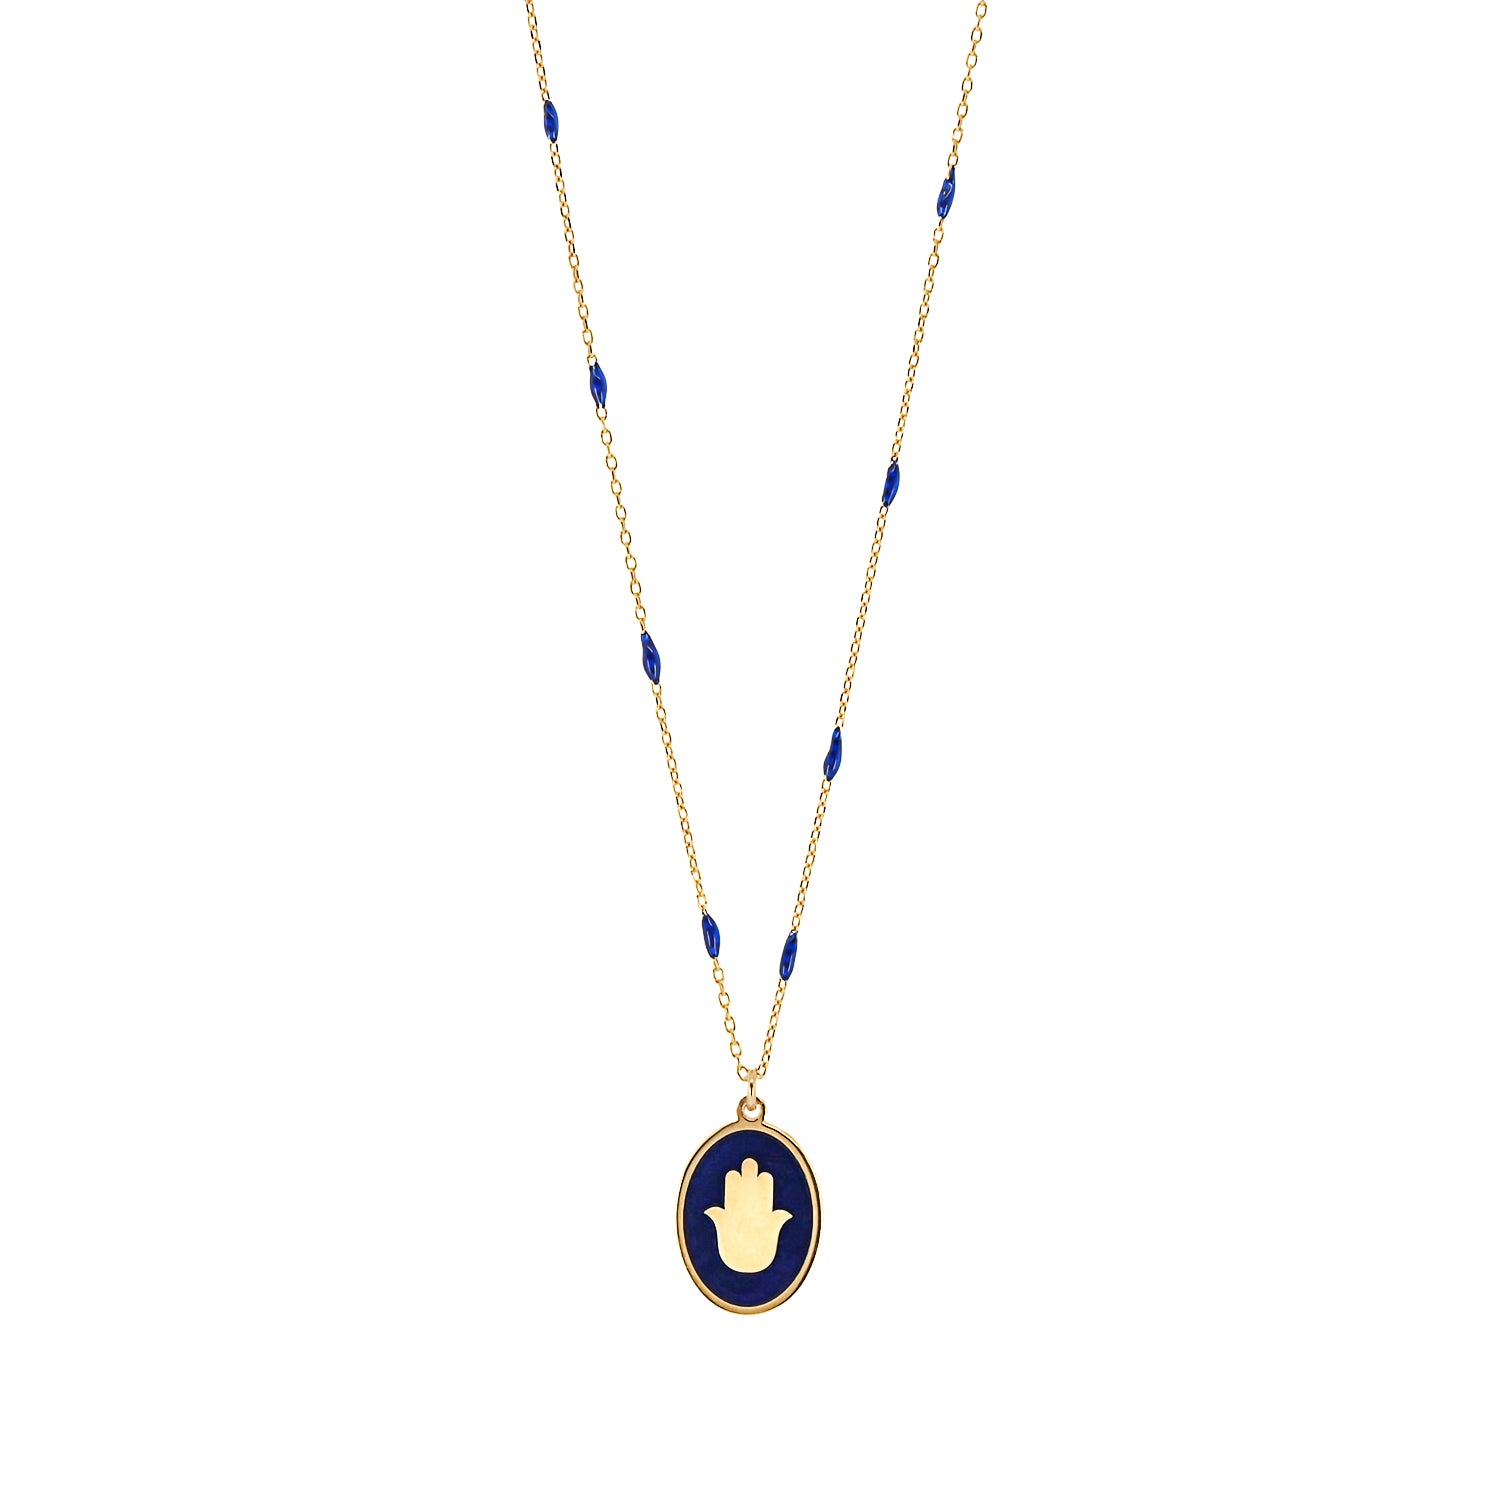 Gold and Blue Enamel Hamsa Hand Pendant - Symbolizing Protection and Blessings.